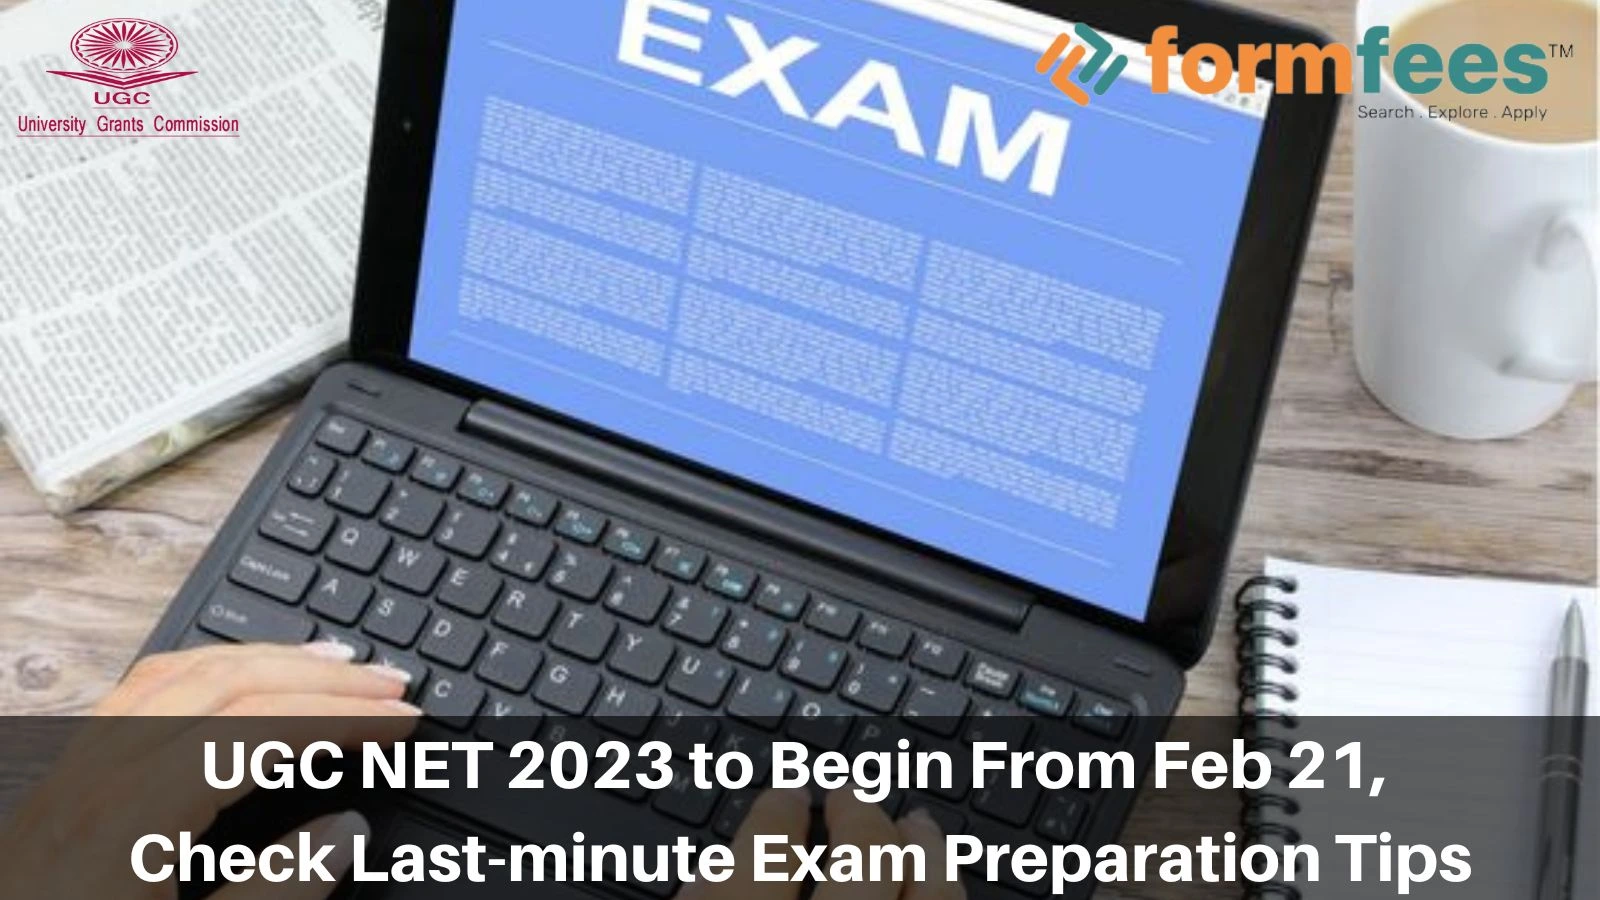 UGC NET 2023 to Begin From Feb 21, Check Last-minute Exam Preparation Tips